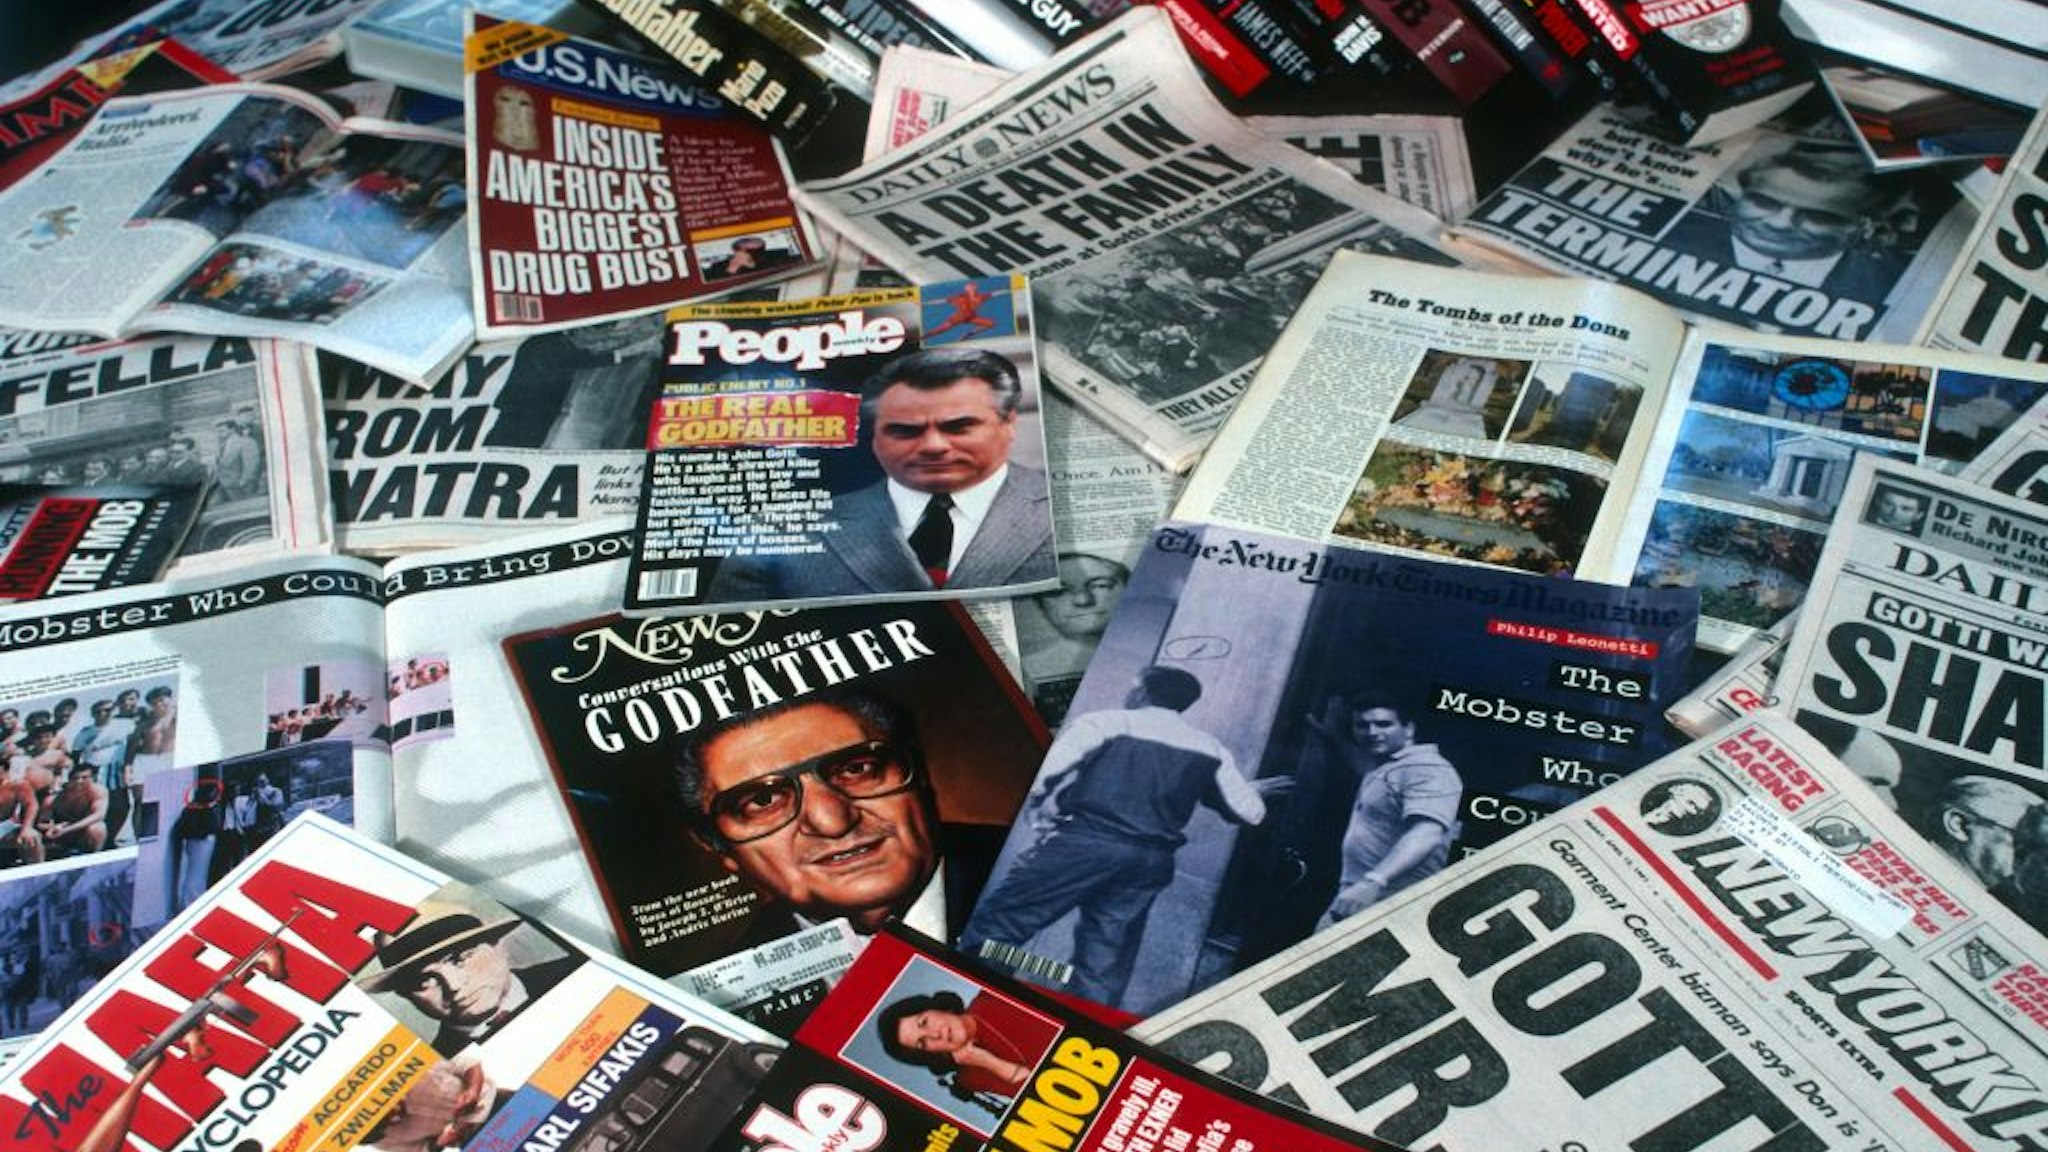 NEW YORK, NY - JUNE 1: Magazines and news papers about the mafia on June 1, 1991 in New York, New York. (Photo by Santi Visalli/Getty Images)